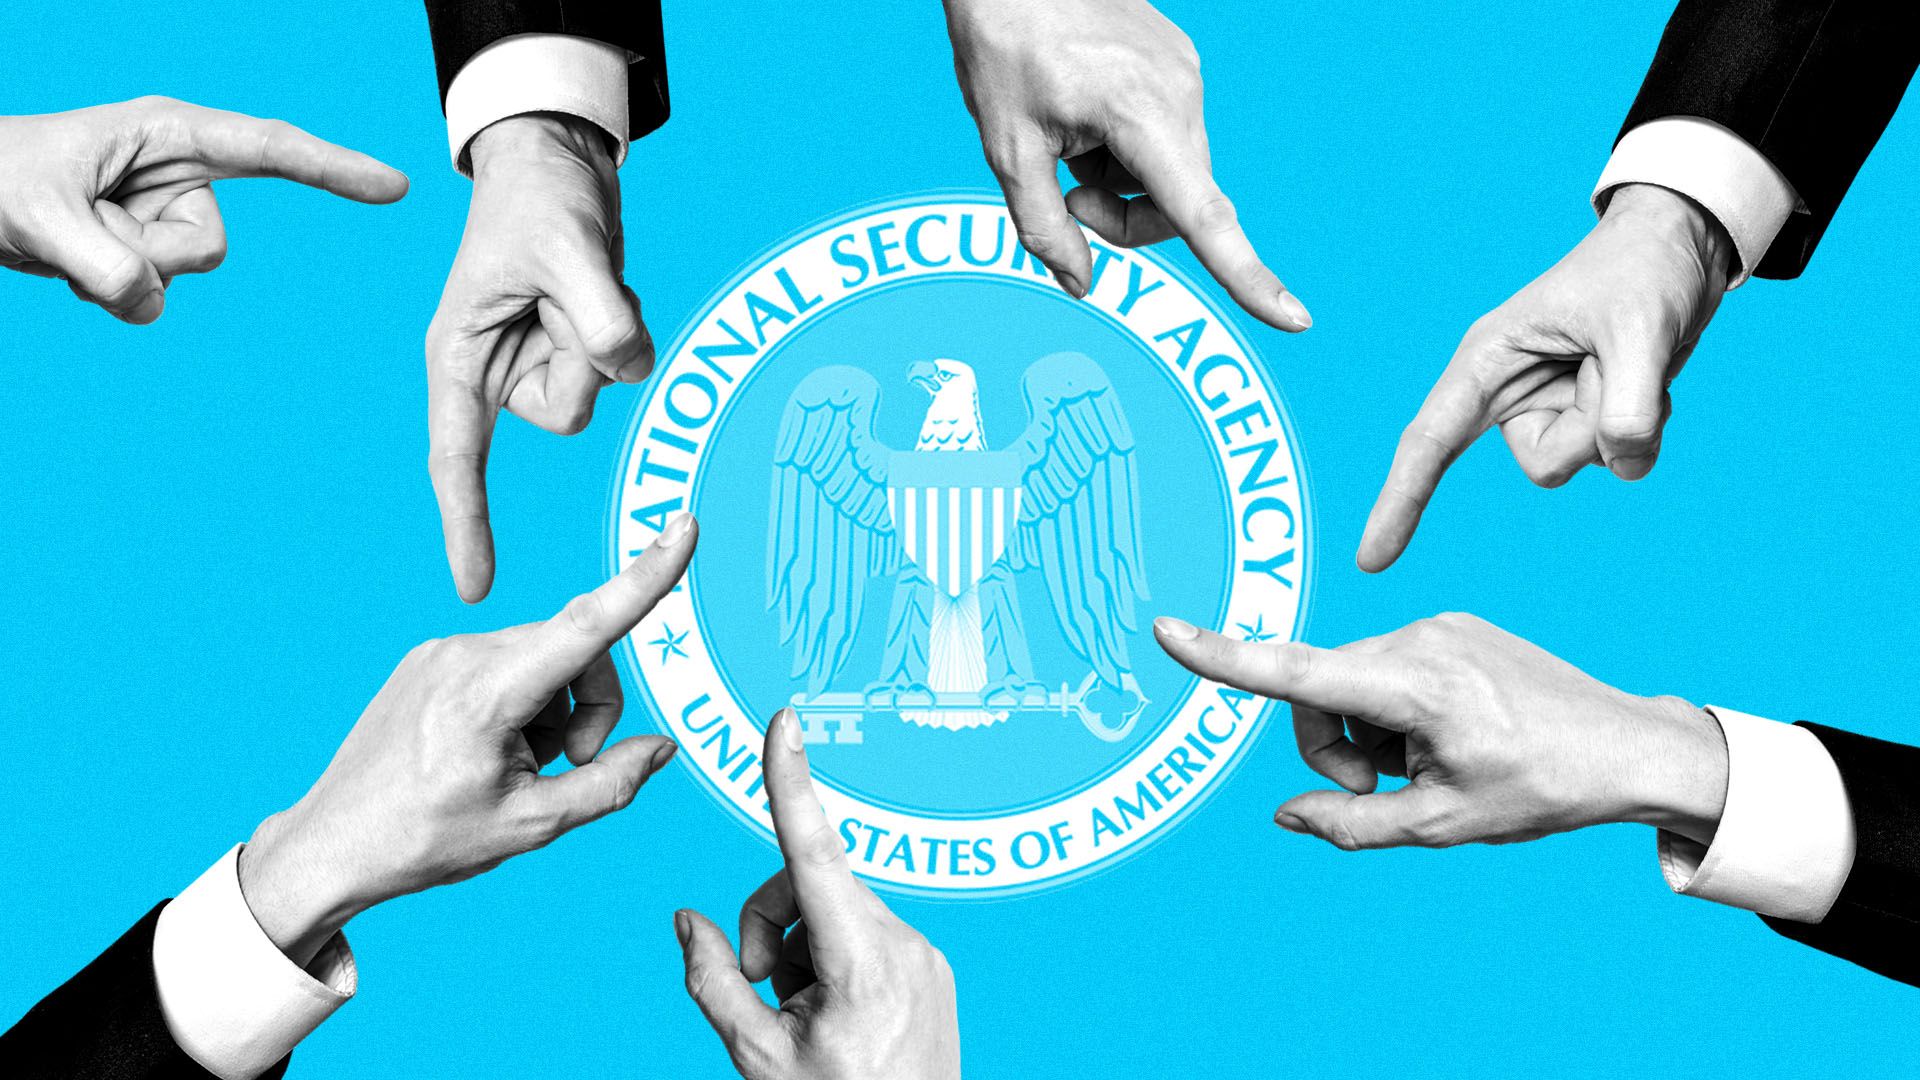 Illustration of fingers pointing across the NSA logo